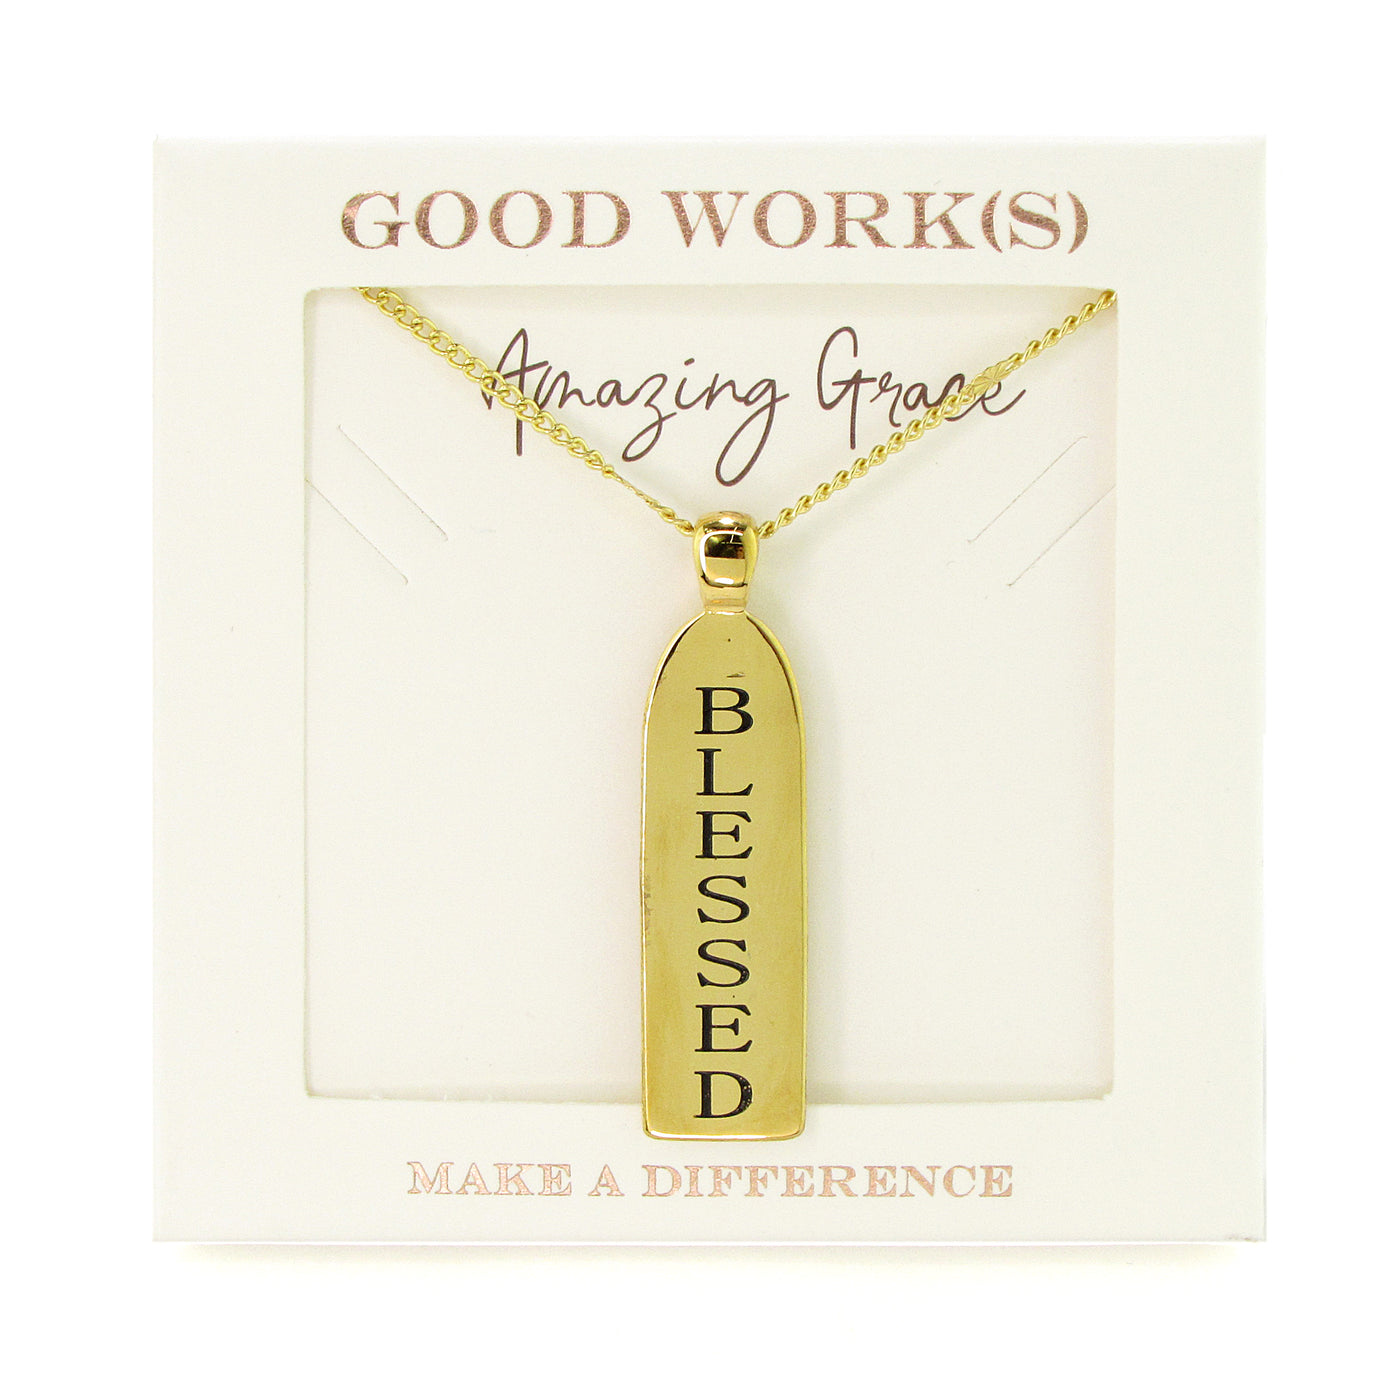 Oath Necklace-Good Work(s) Make A Difference® | Christian and Inspirational Jewelry Company in Vernon, California